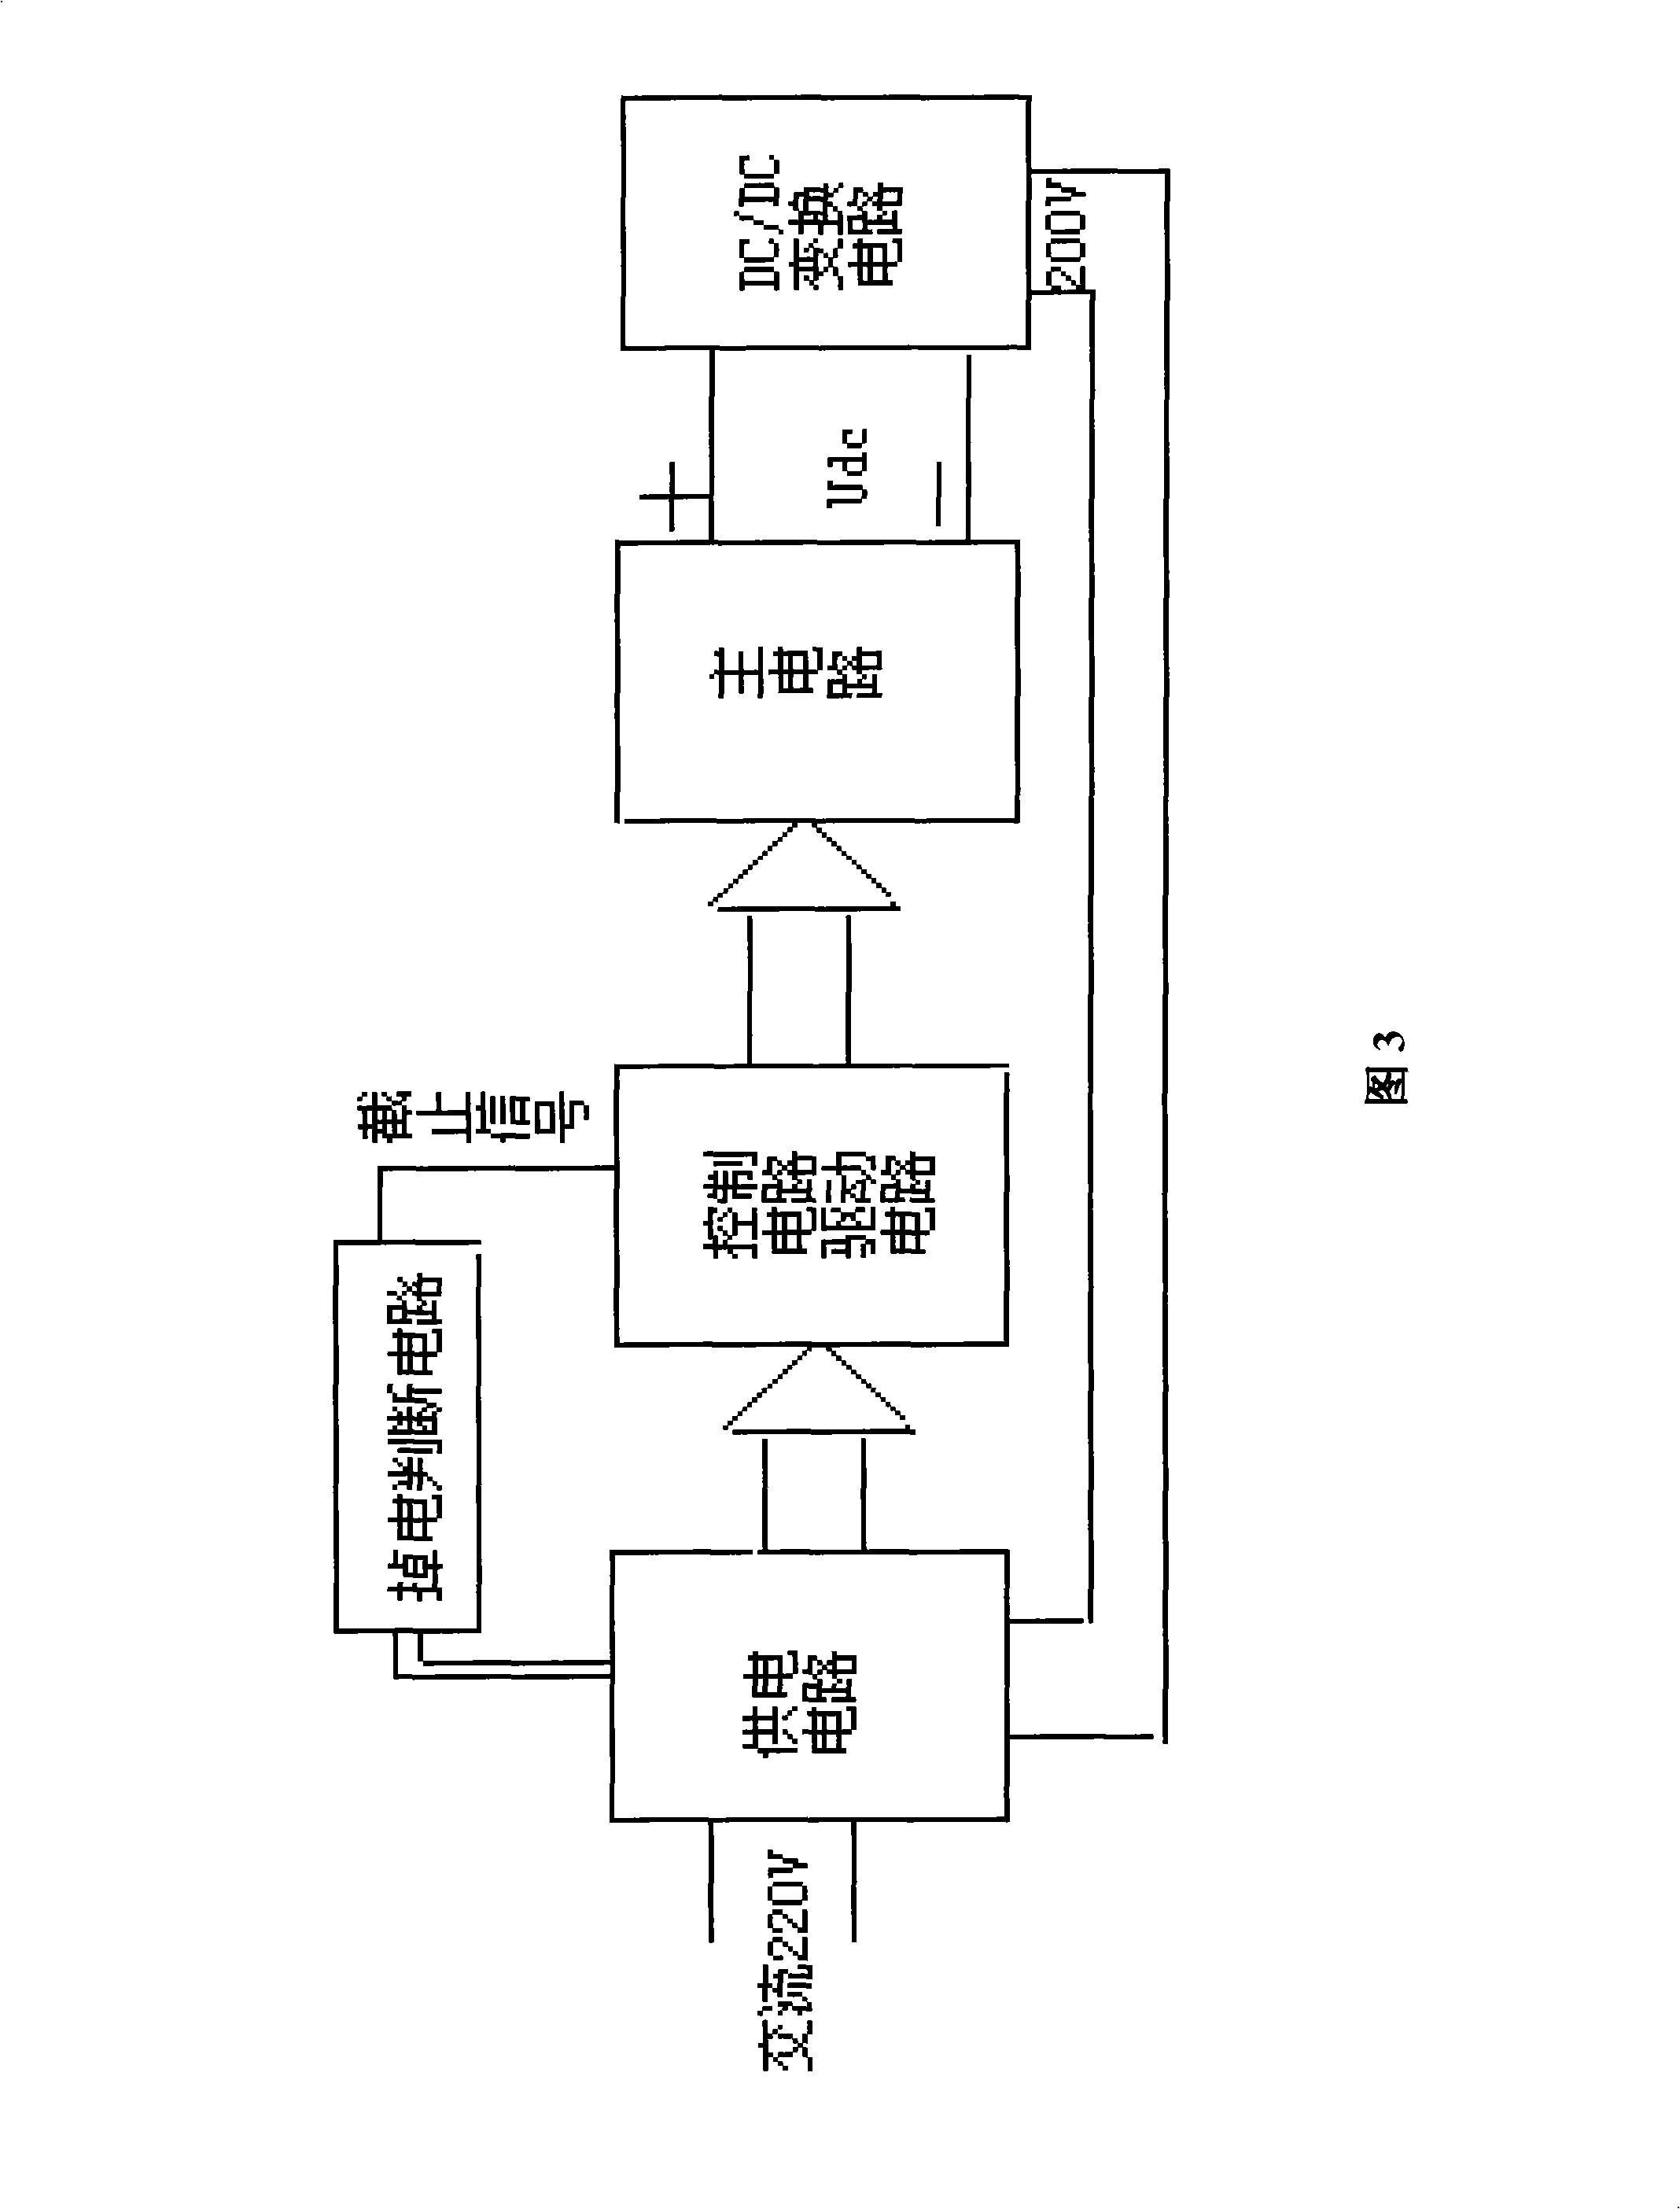 Protecting method for sudden drop of electric and electronic equipment with medium or high electric power